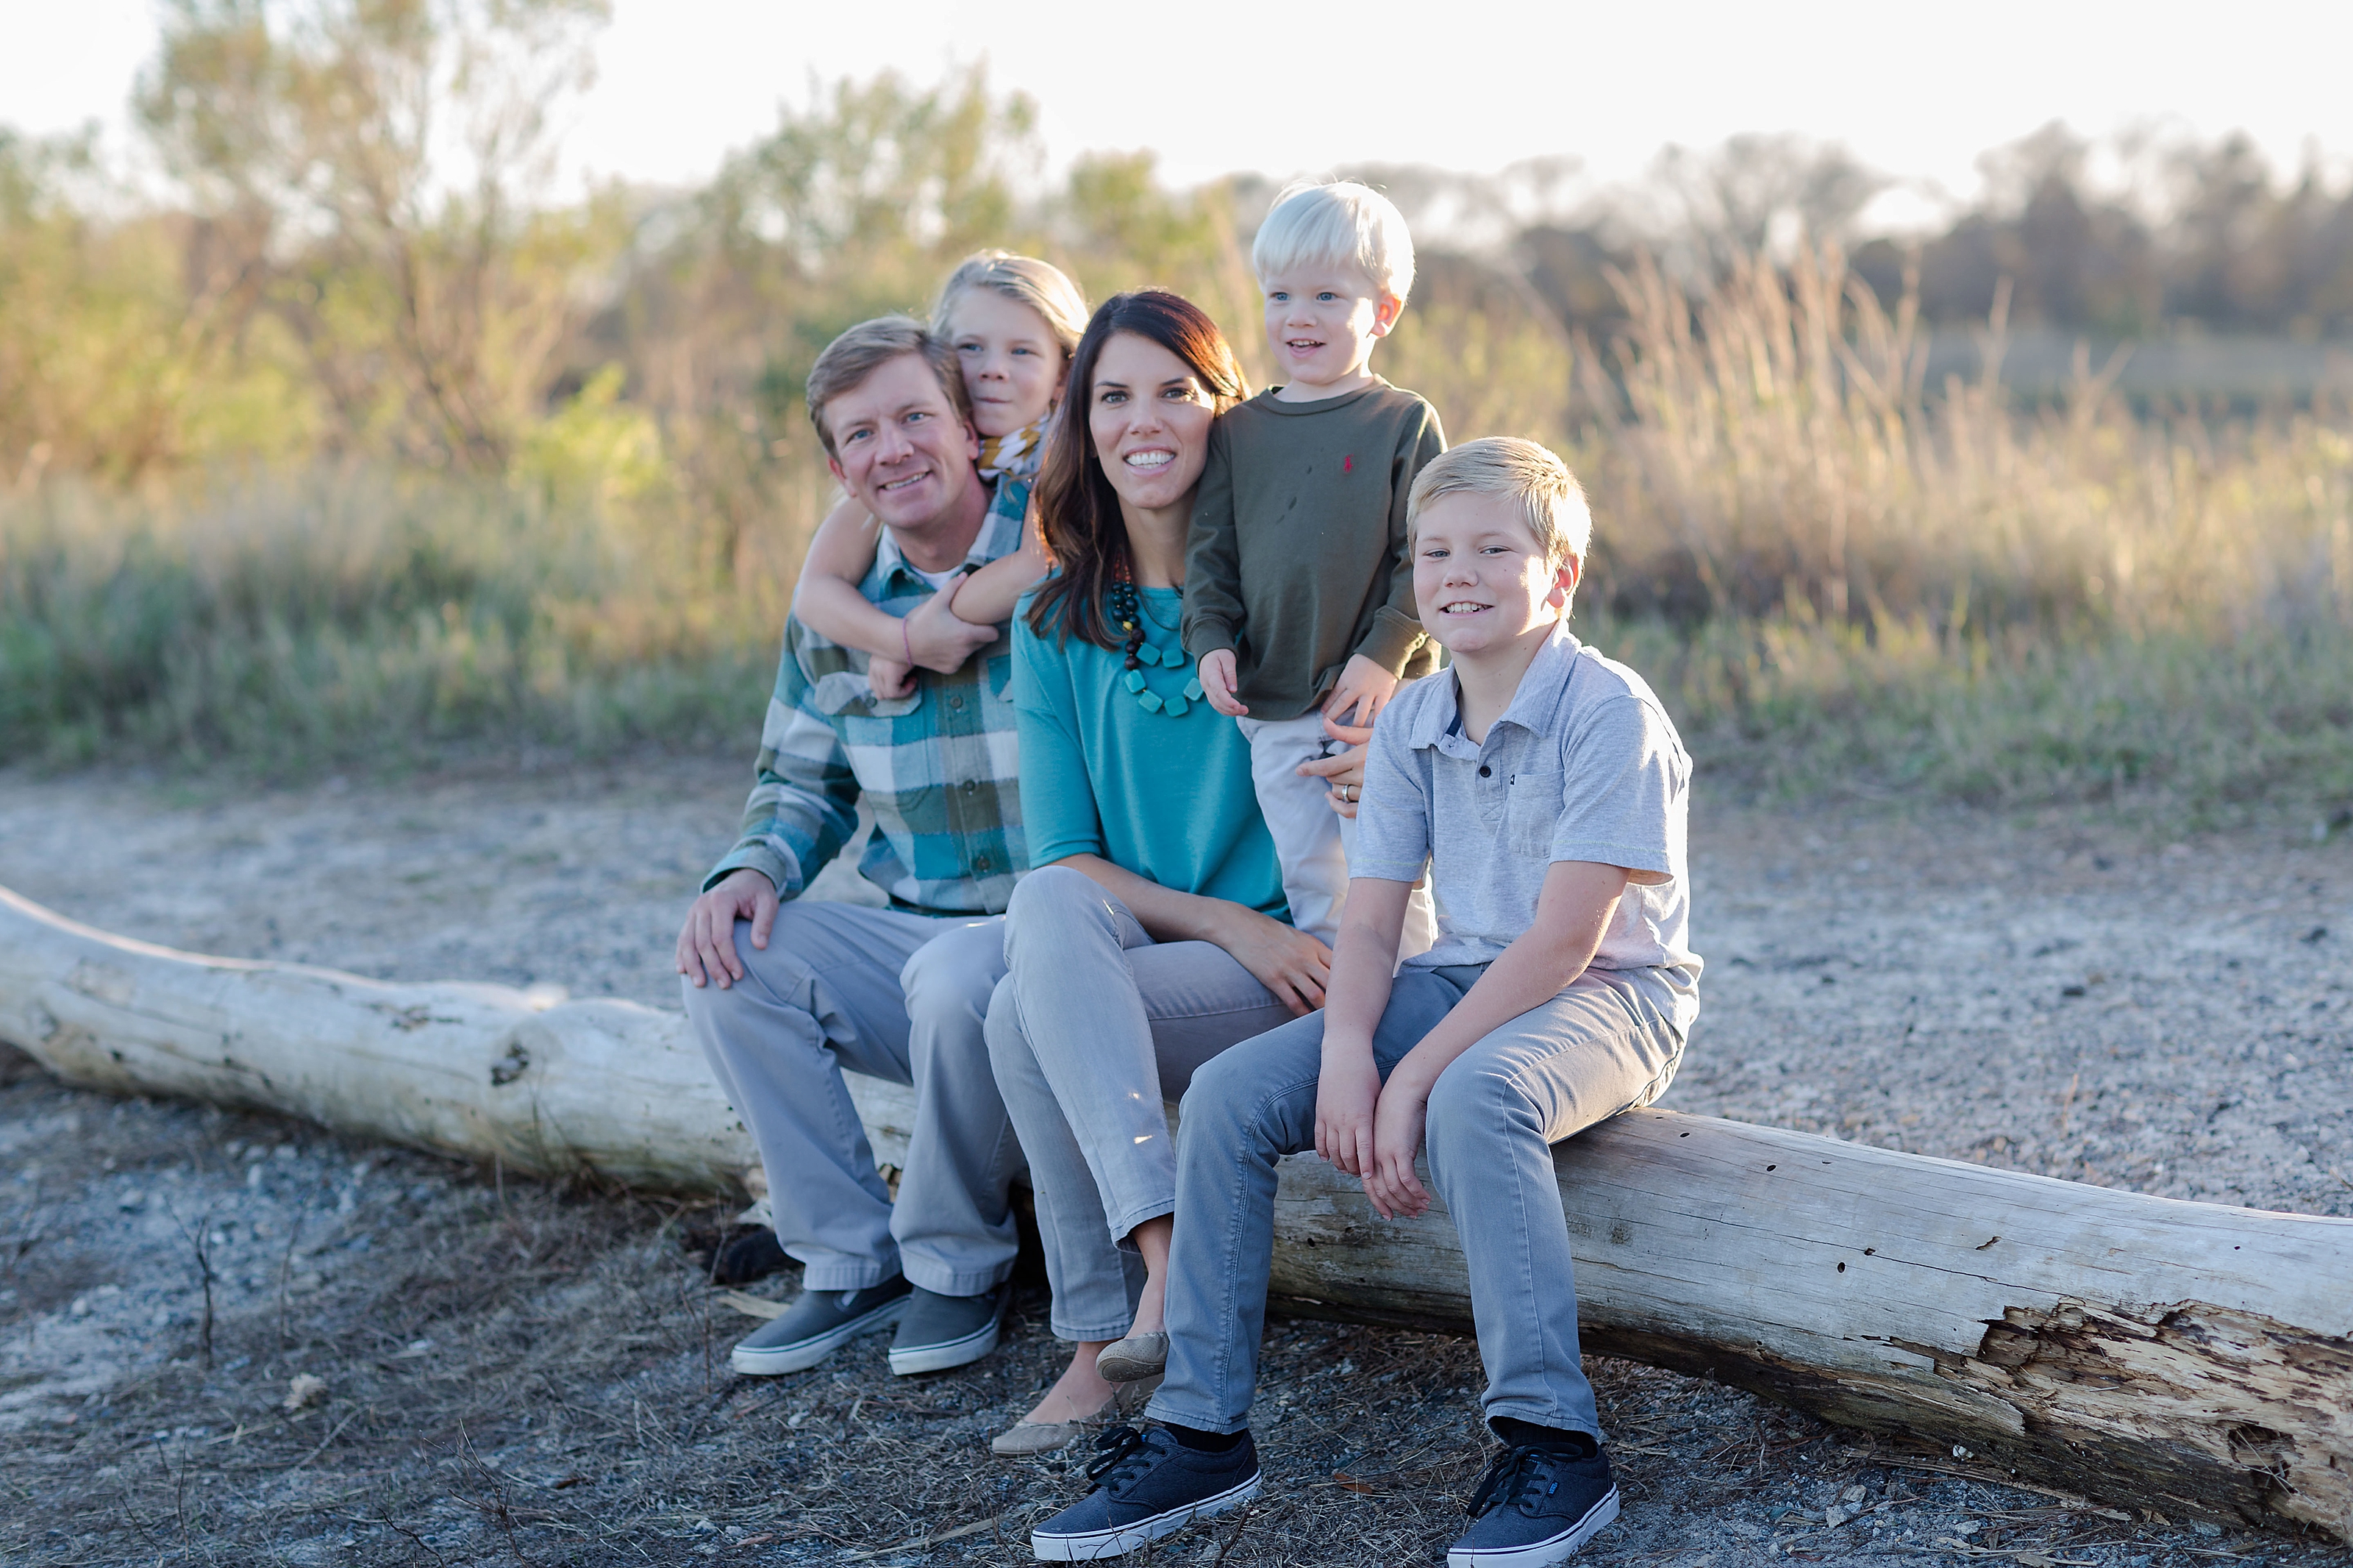 Teal and Grey Outdoor Family lifestyle photography by Brooke Tucker